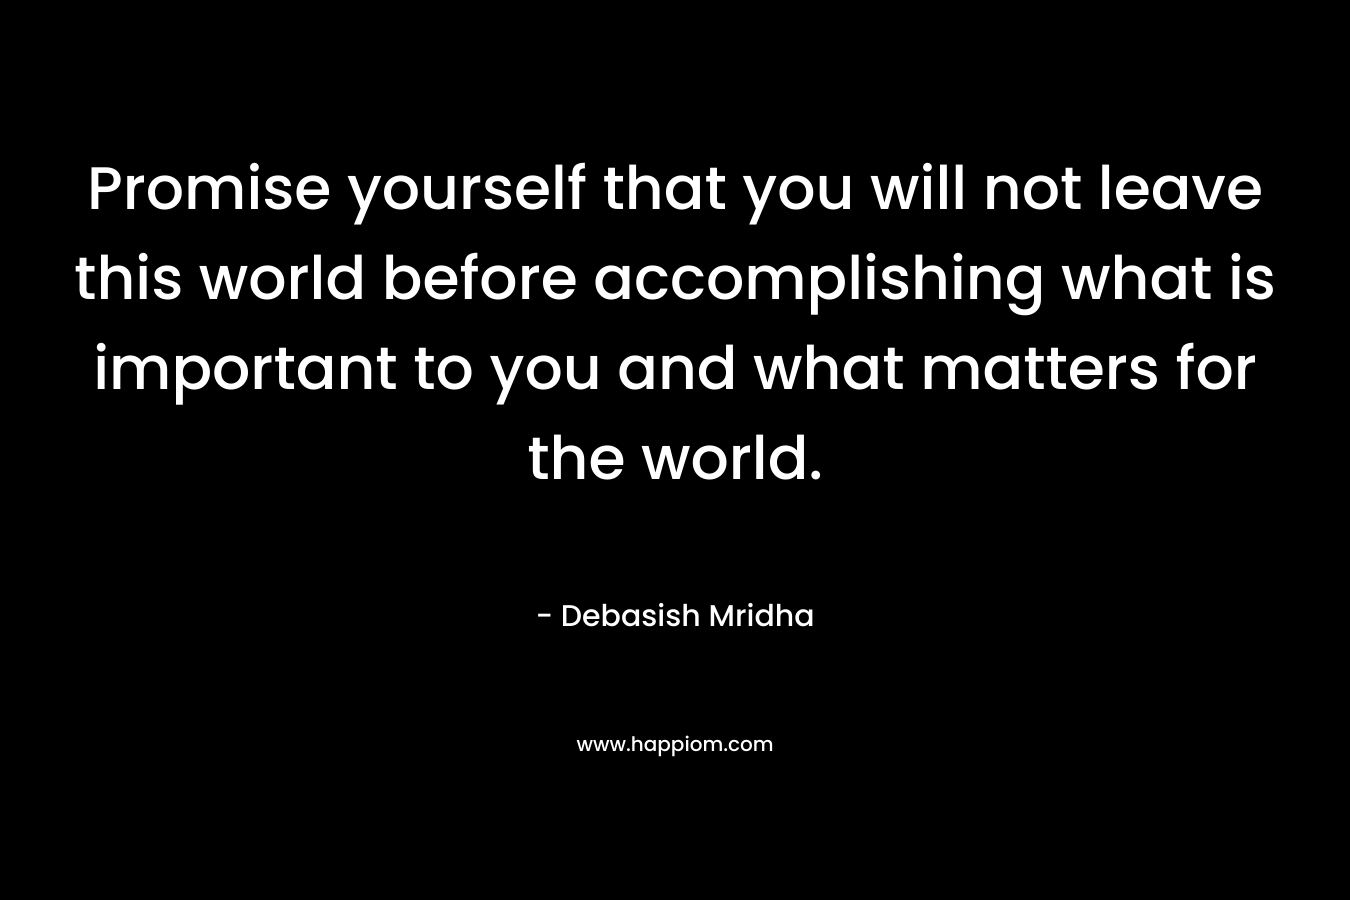 Promise yourself that you will not leave this world before accomplishing what is important to you and what matters for the world.